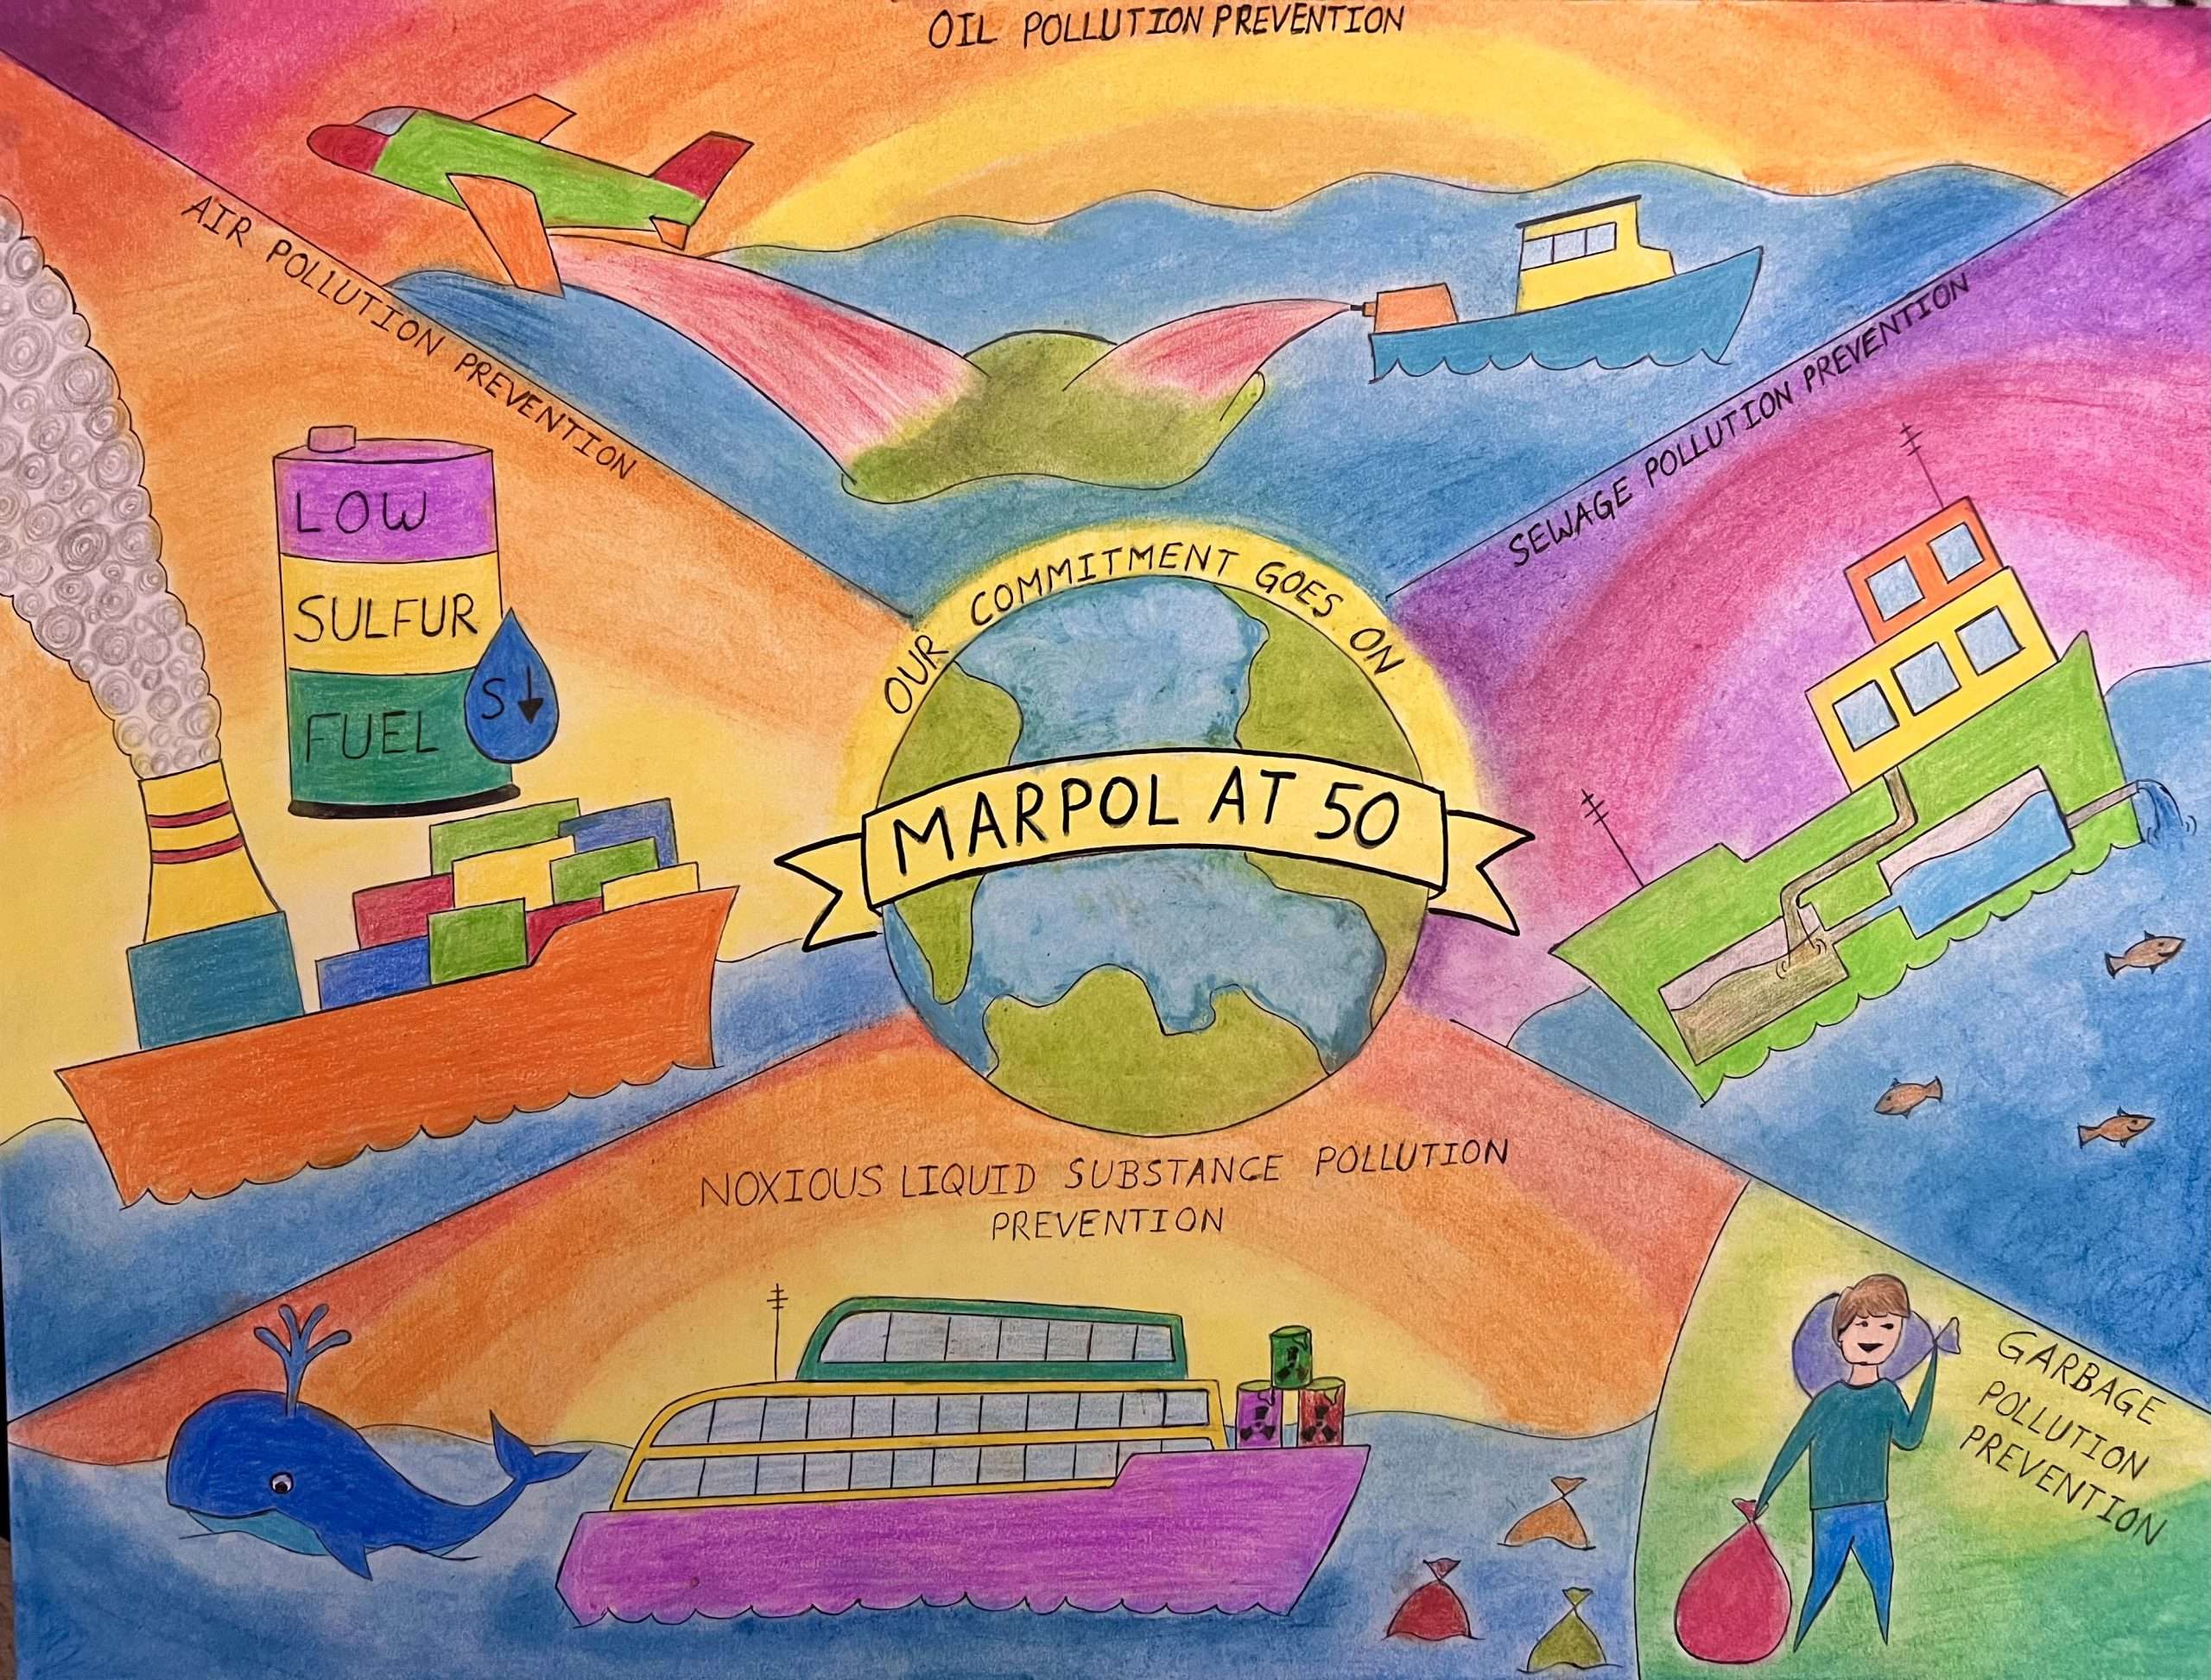 A colorful drawing that is split into five sections. On the left side is a ship and battery with the text "Low Sulfur Fuel." On the top section is a plane and ship with the text "Oil Pollution Prevention. On the right side is a ship on the water with the text "Sewage Pollution Prevention." On the bottom section is a ship on the water with a whale and three trash bags in the water with the text "Noxious Liquid Substance Pollution Prevention." In the last section is a human holding two trash bags with the text "Garbage Pollution Prevention." In the center of the drawing is a globe with the text MARPOL AT 50 Our Commitment goes on."